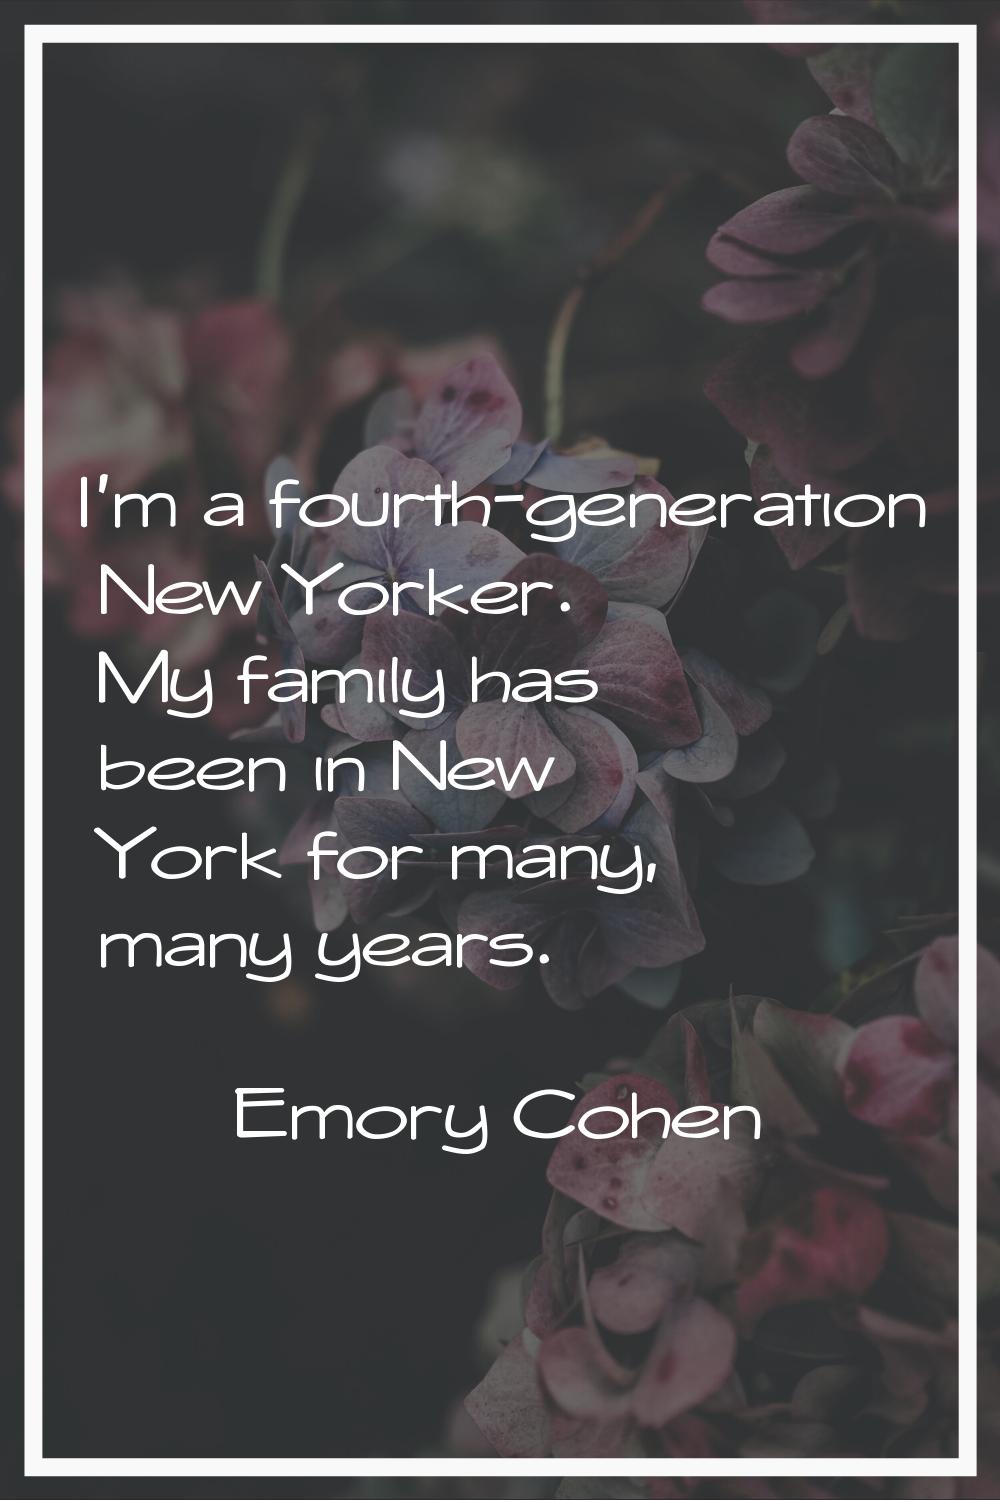 I'm a fourth-generation New Yorker. My family has been in New York for many, many years.